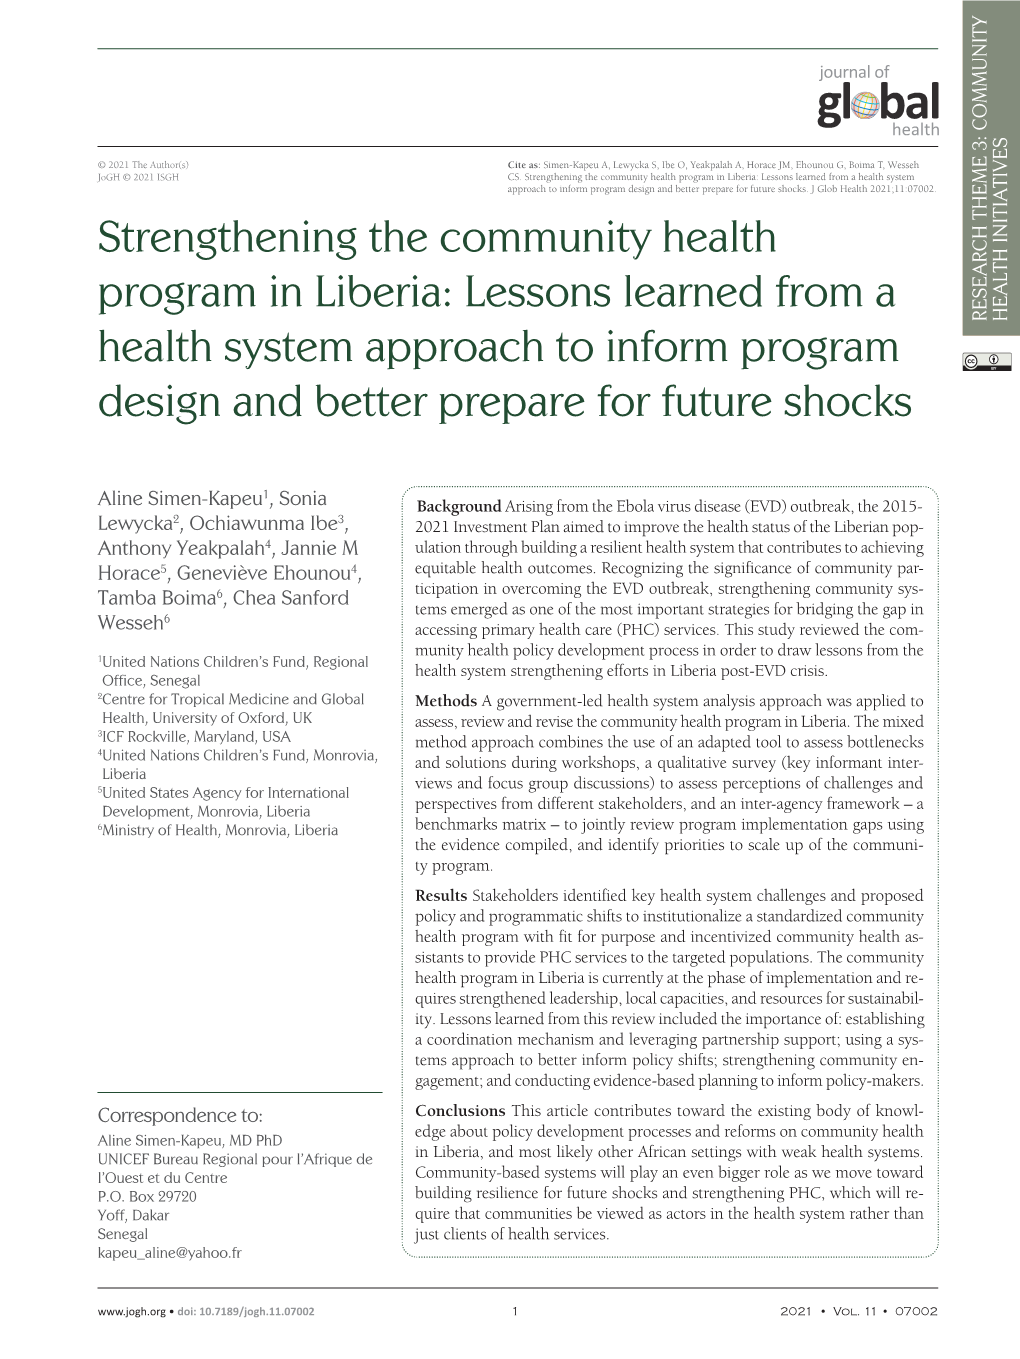 Strengthening the Community Health Program in Liberia: Lessons Learned from a Health System Approach to Inform Program Design An